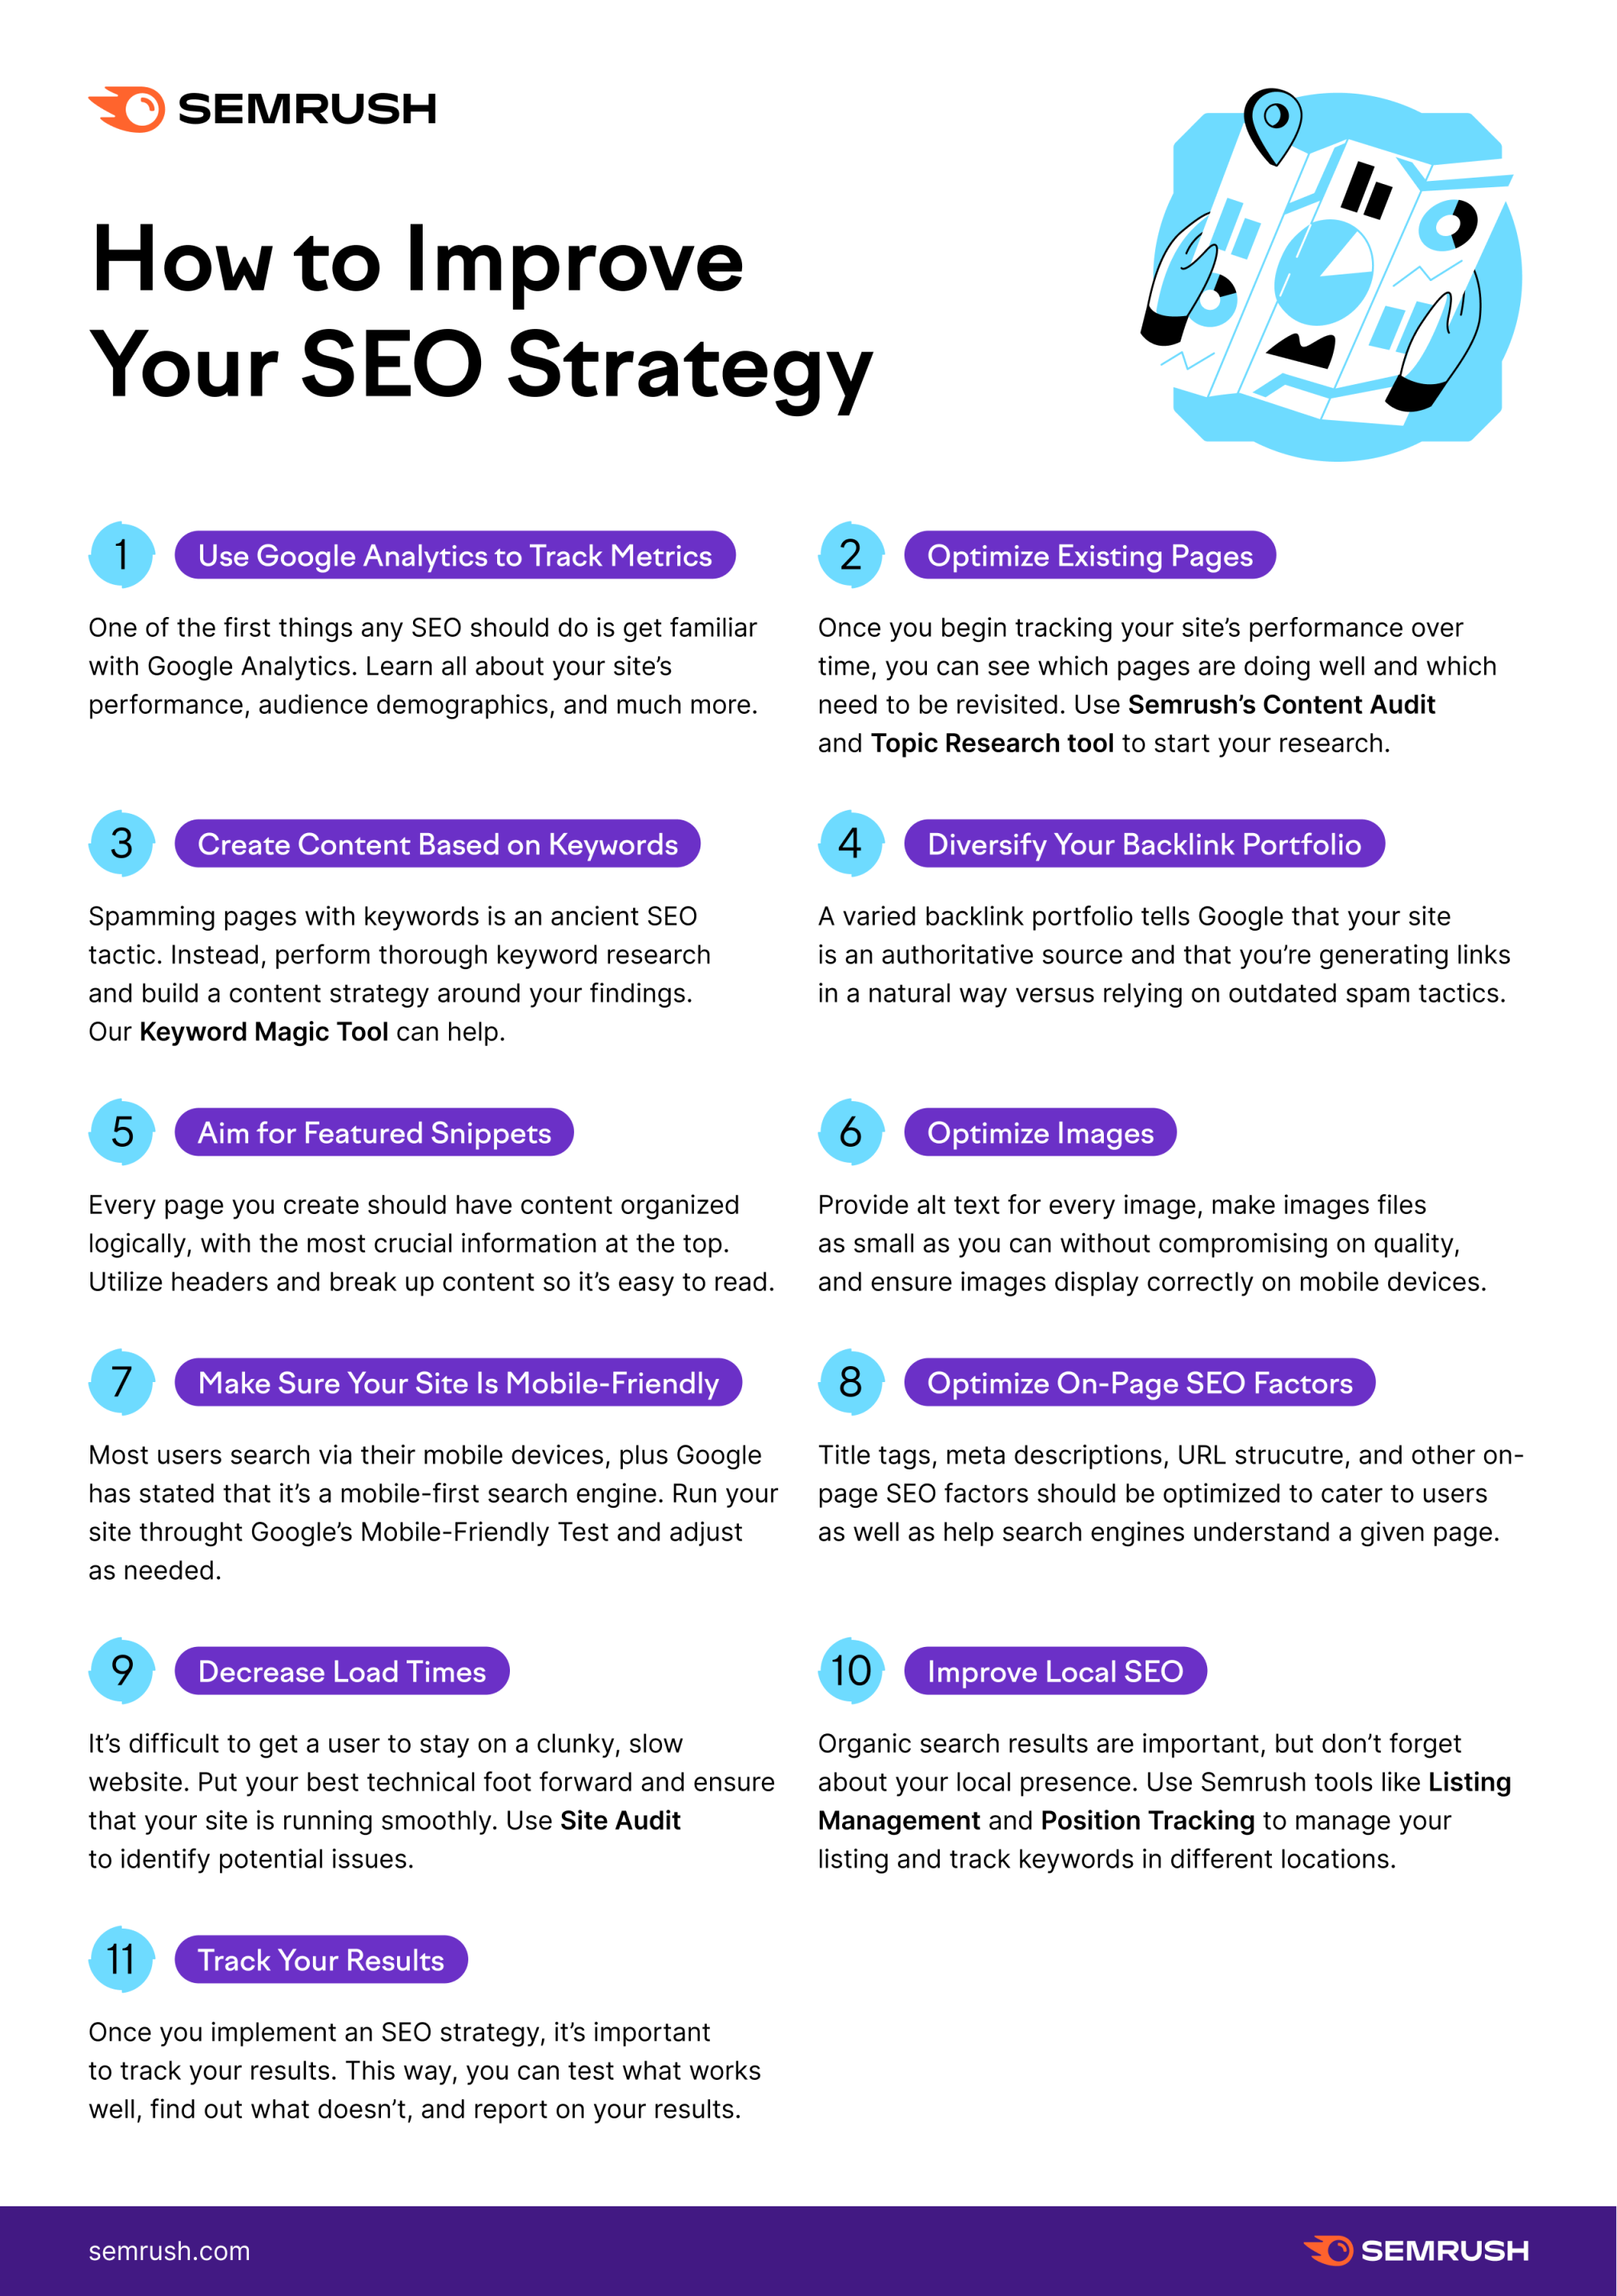 How to Improve Your SEO in 11 Steps